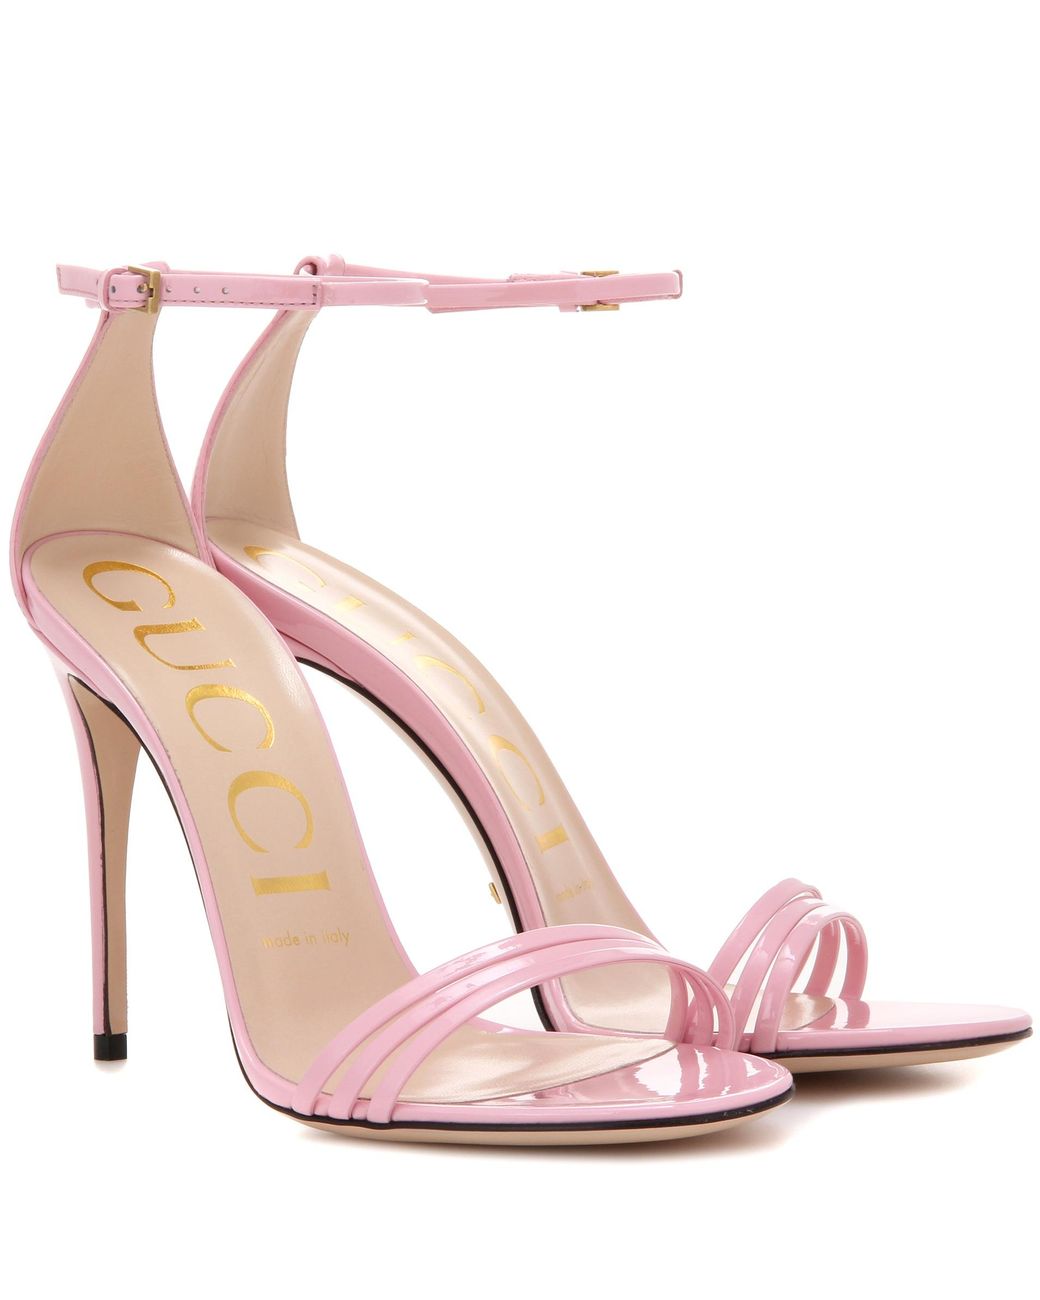 Gucci Patent Leather Sandals in Pink | Lyst